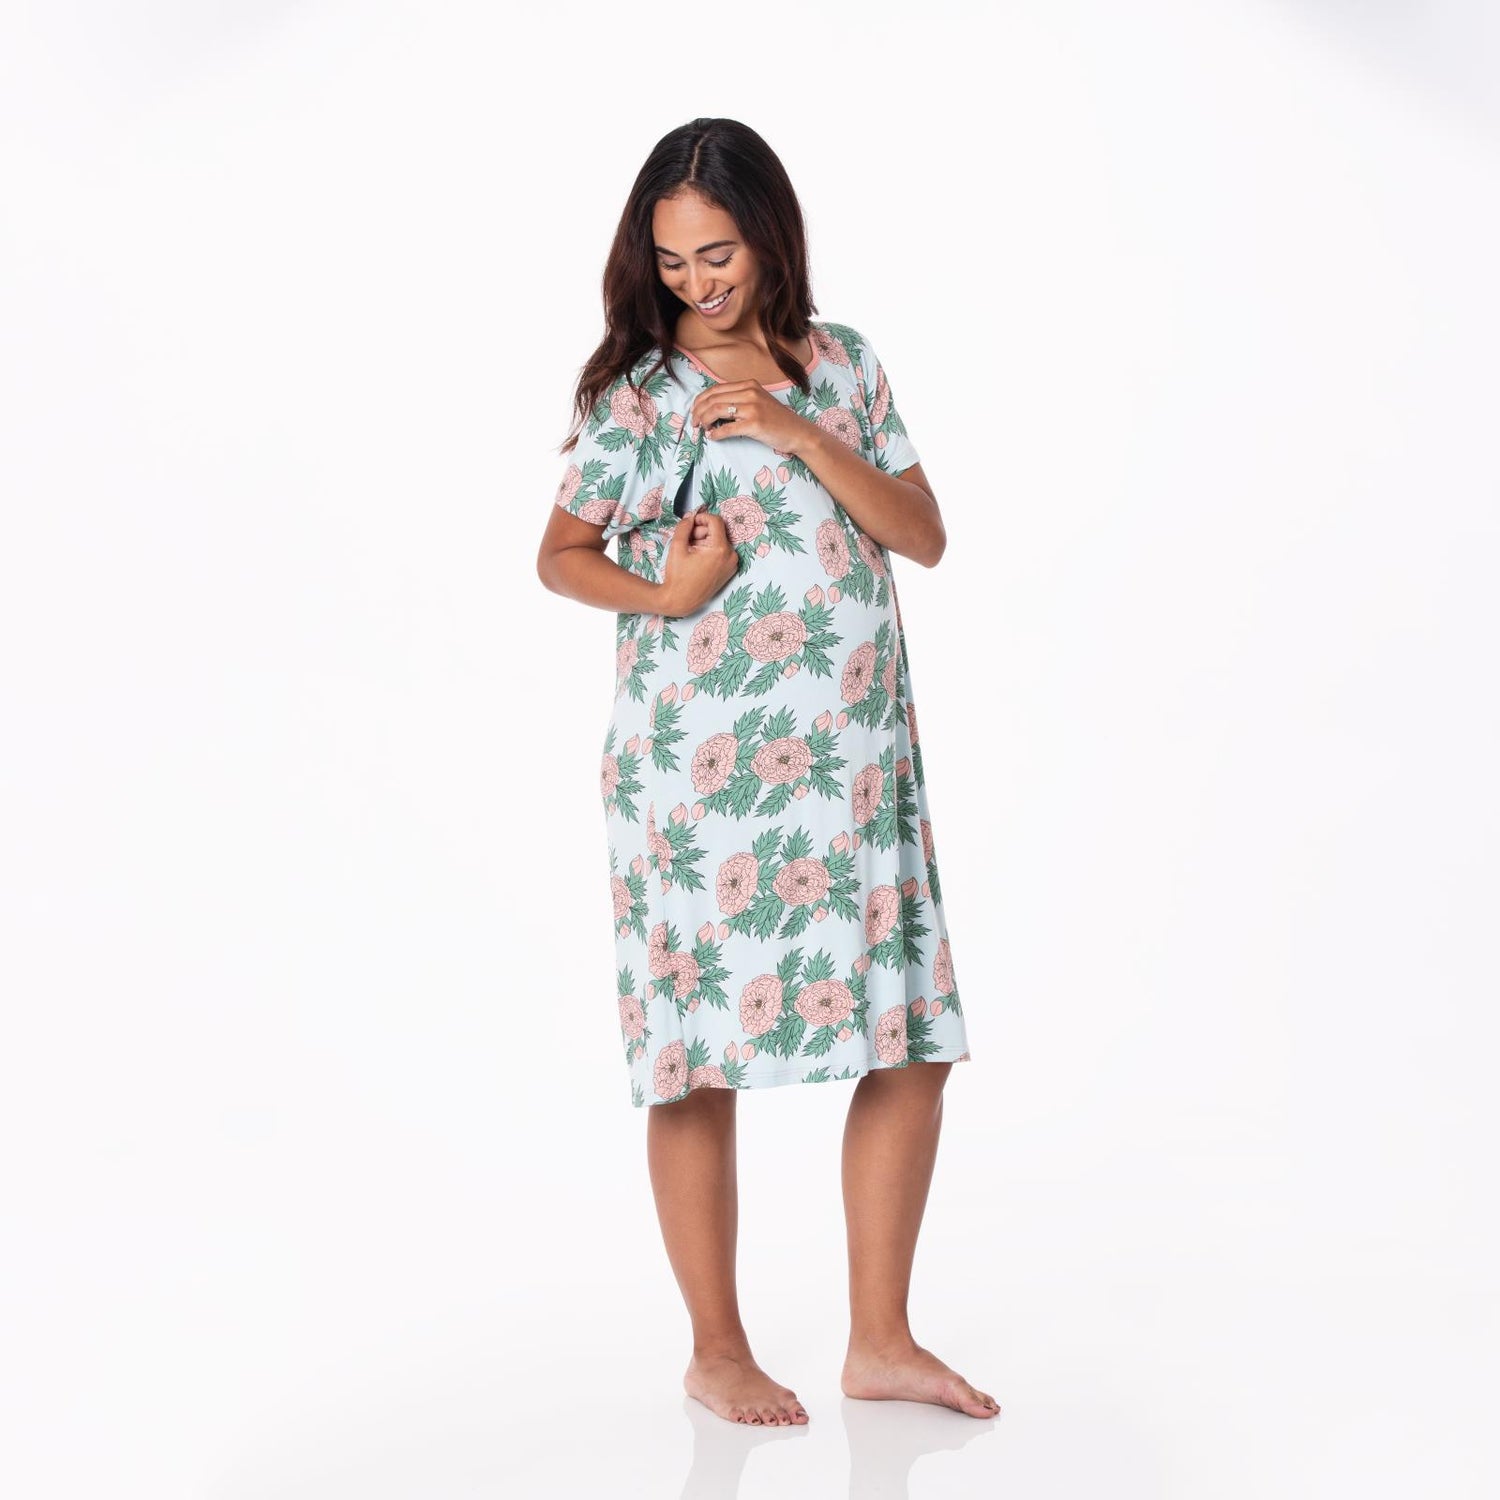 Women's Print Hospital Gown in Spring Sky Floral